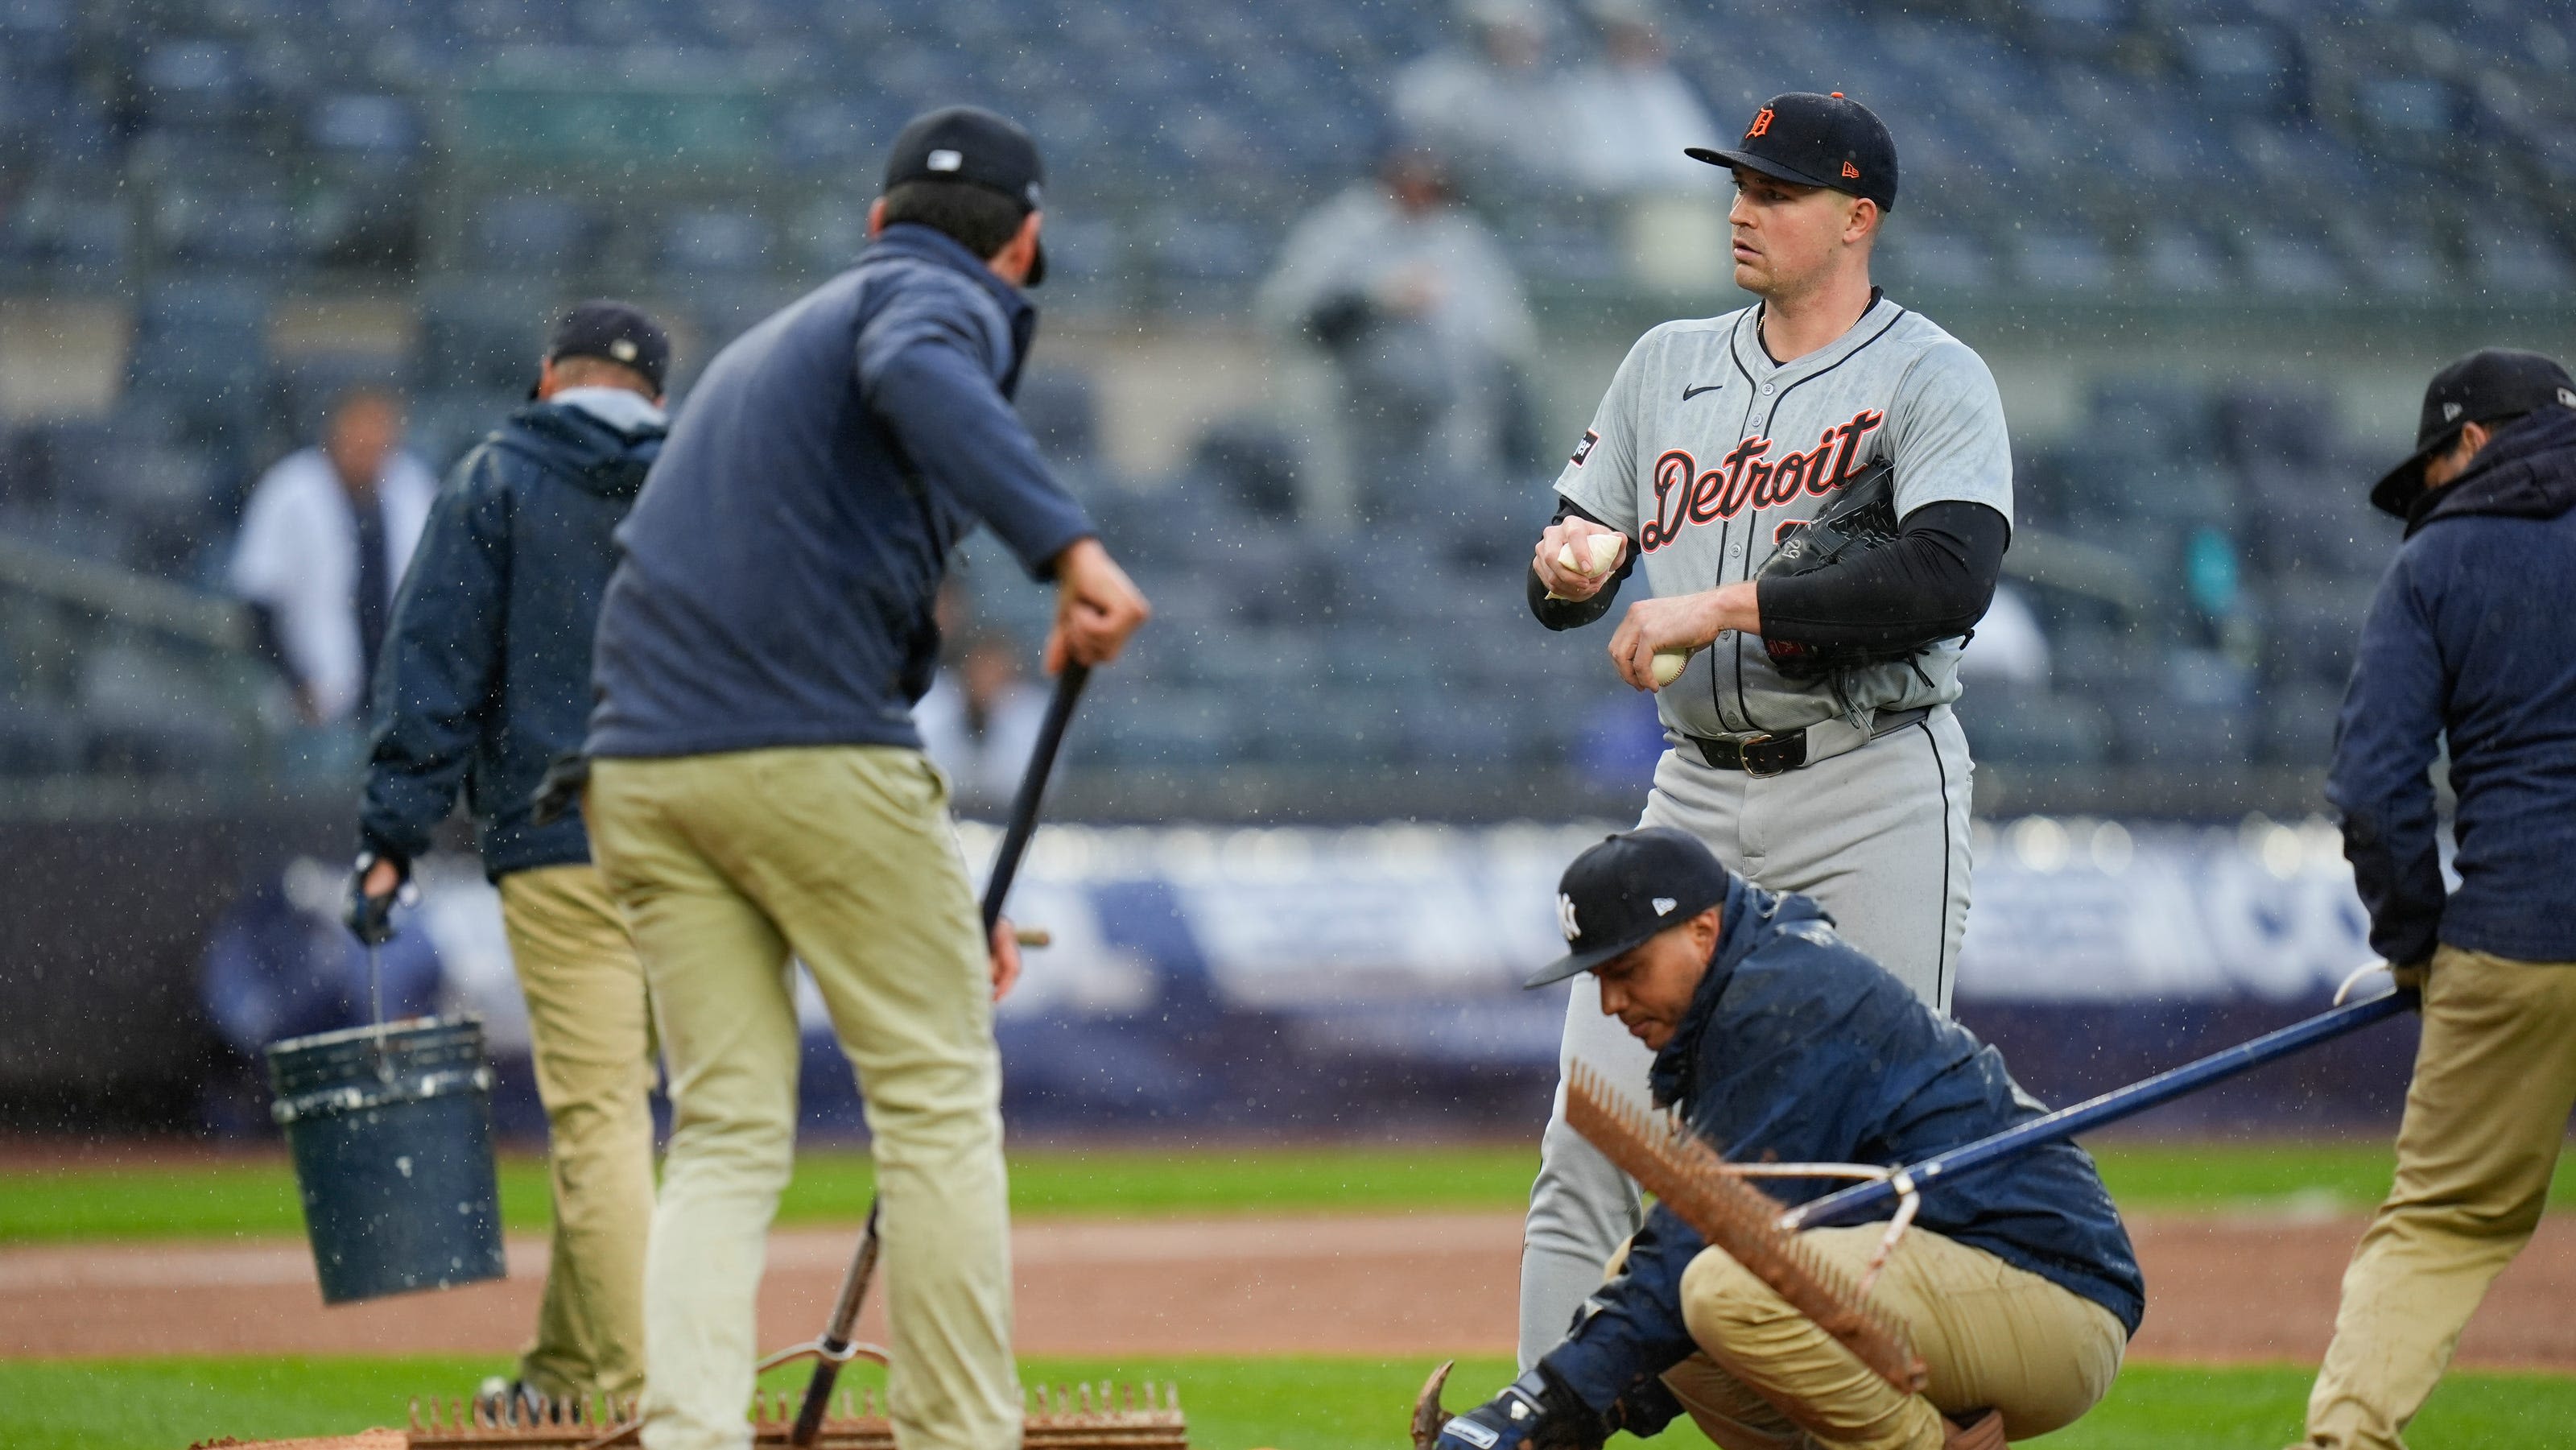 Tigers swept by Yankees in rain-shortened finale